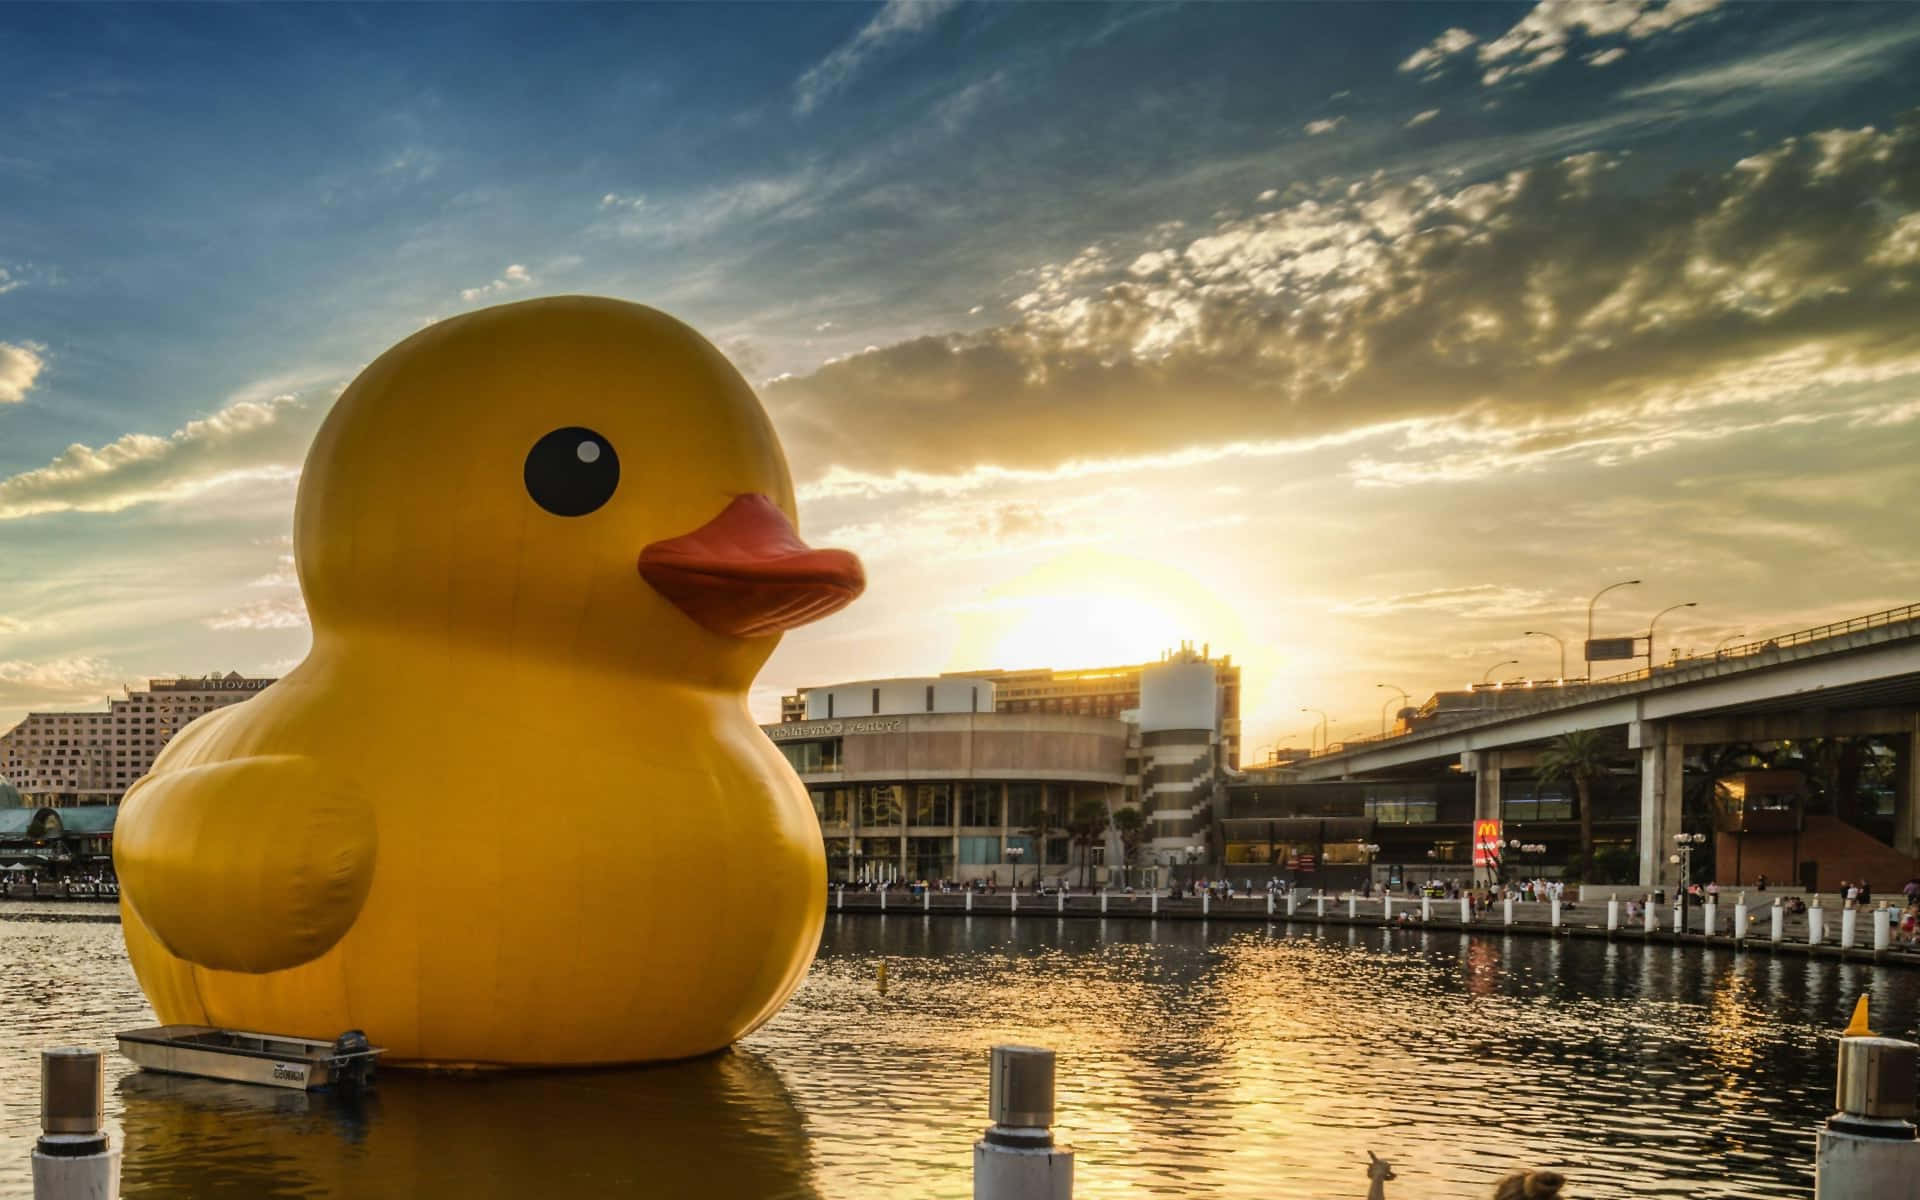 “quack, Quack! It's My Favorite Time Of Day To Take A Dip!”